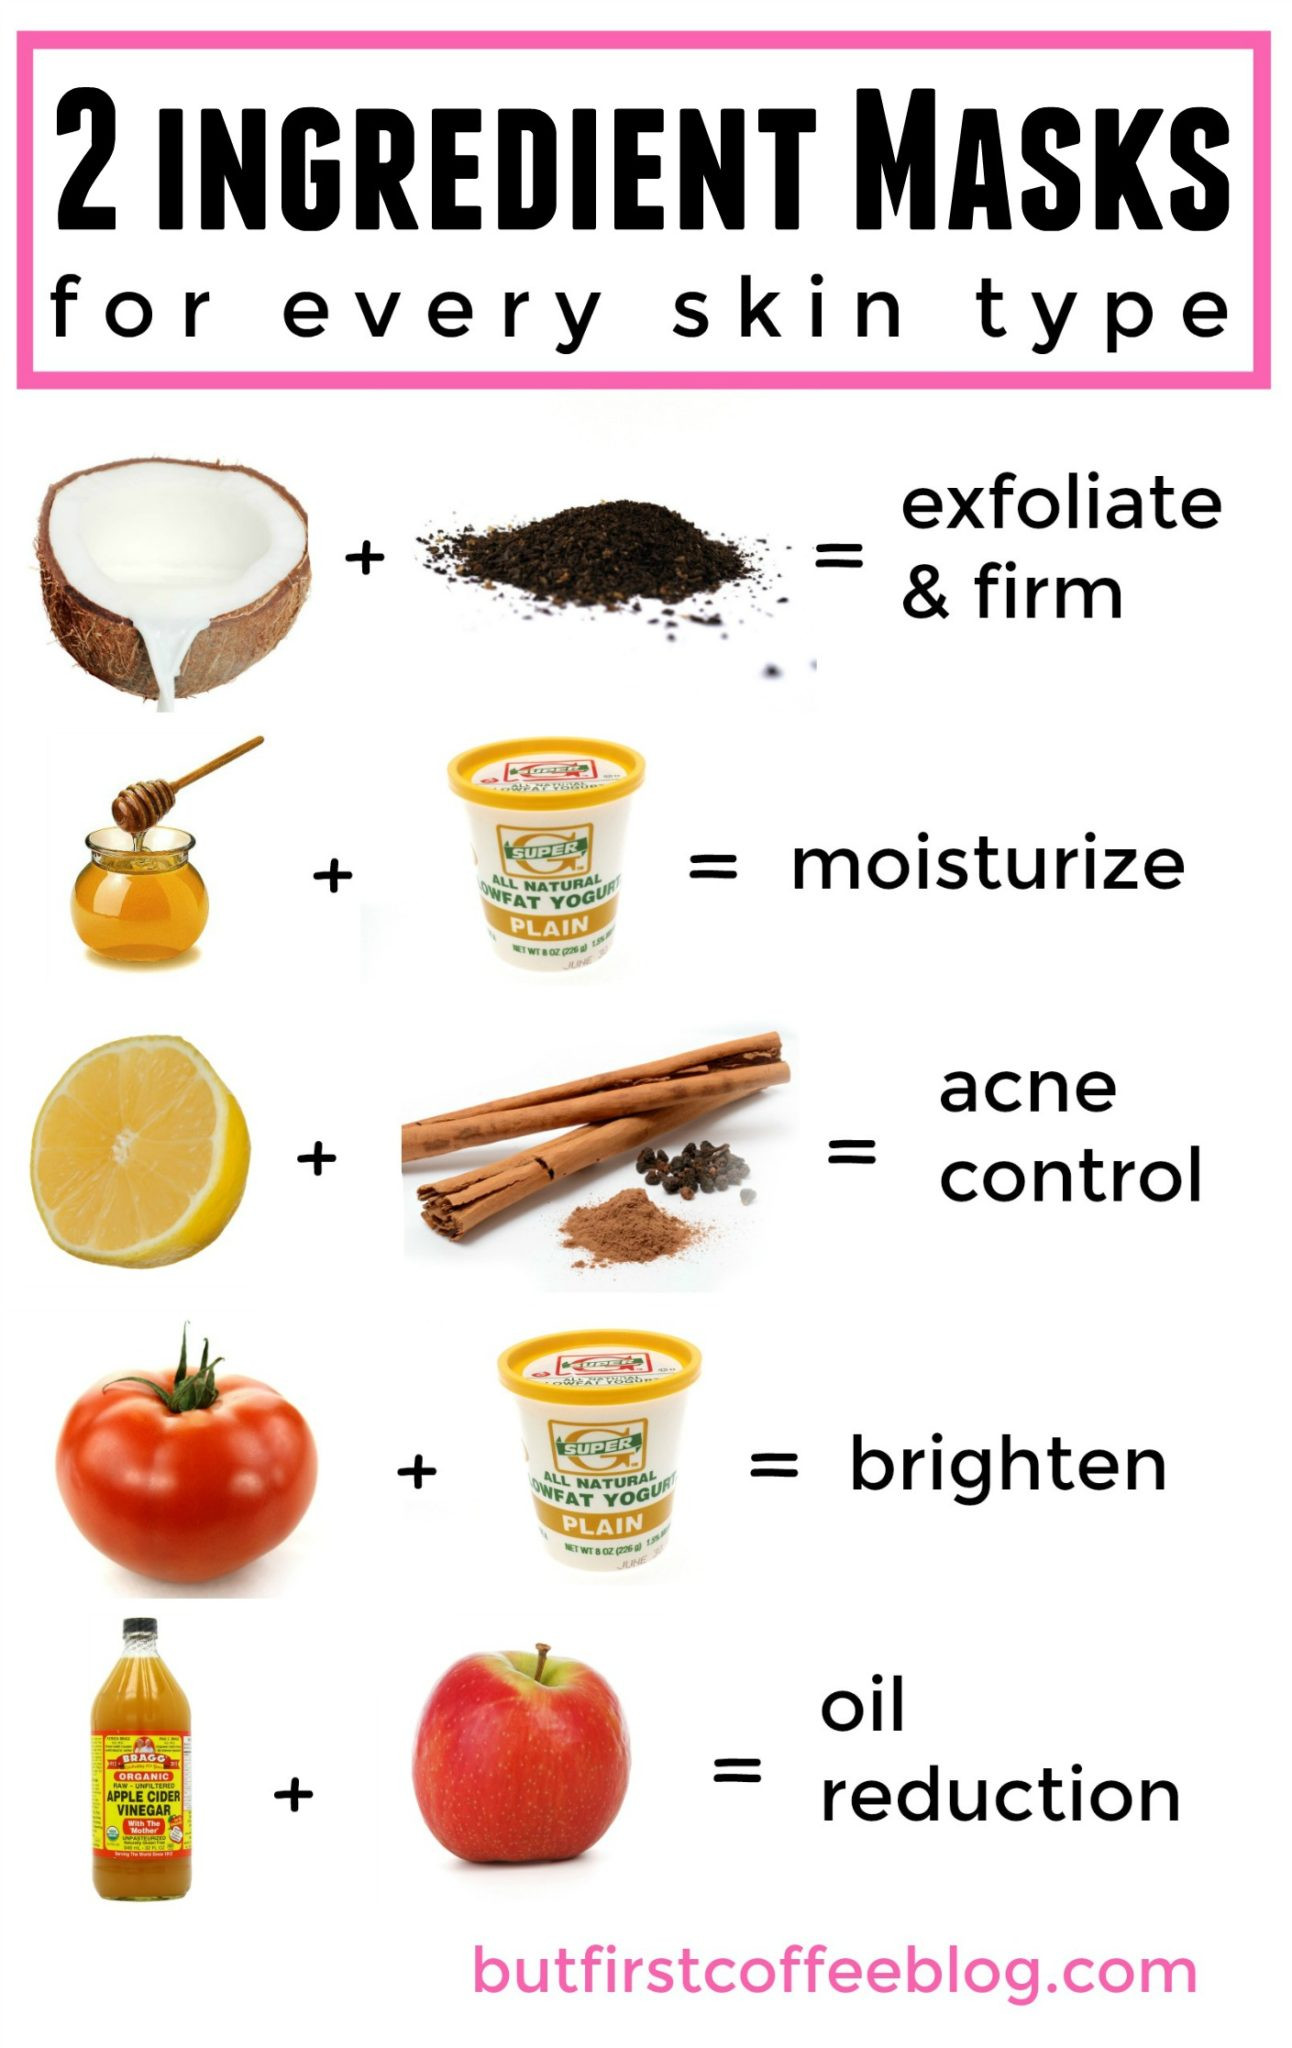 DIY Face Mask For Breakouts
 2 Ingre nt D I Y Face Masks for Every Skin Type